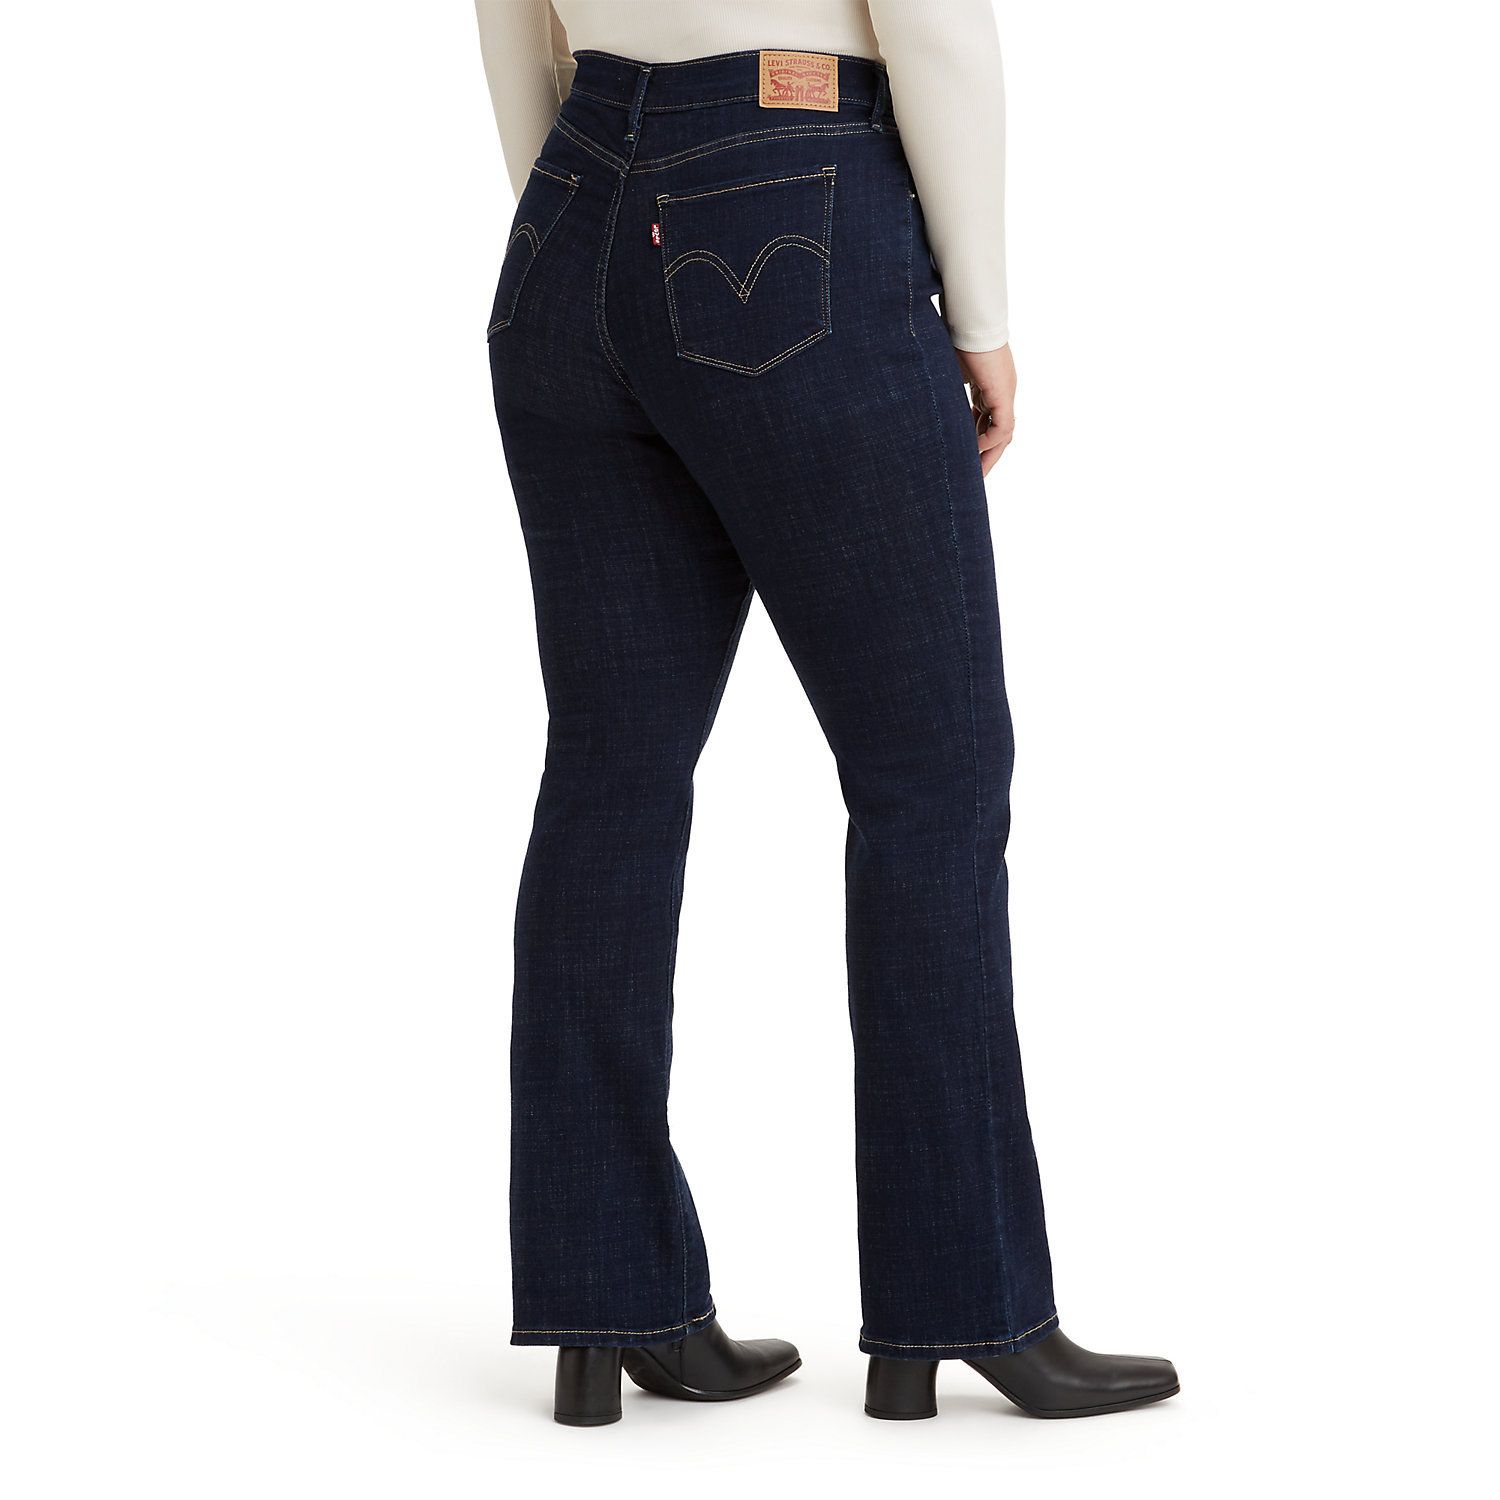 Levi's Bootcut Jeans for Women | Kohl's